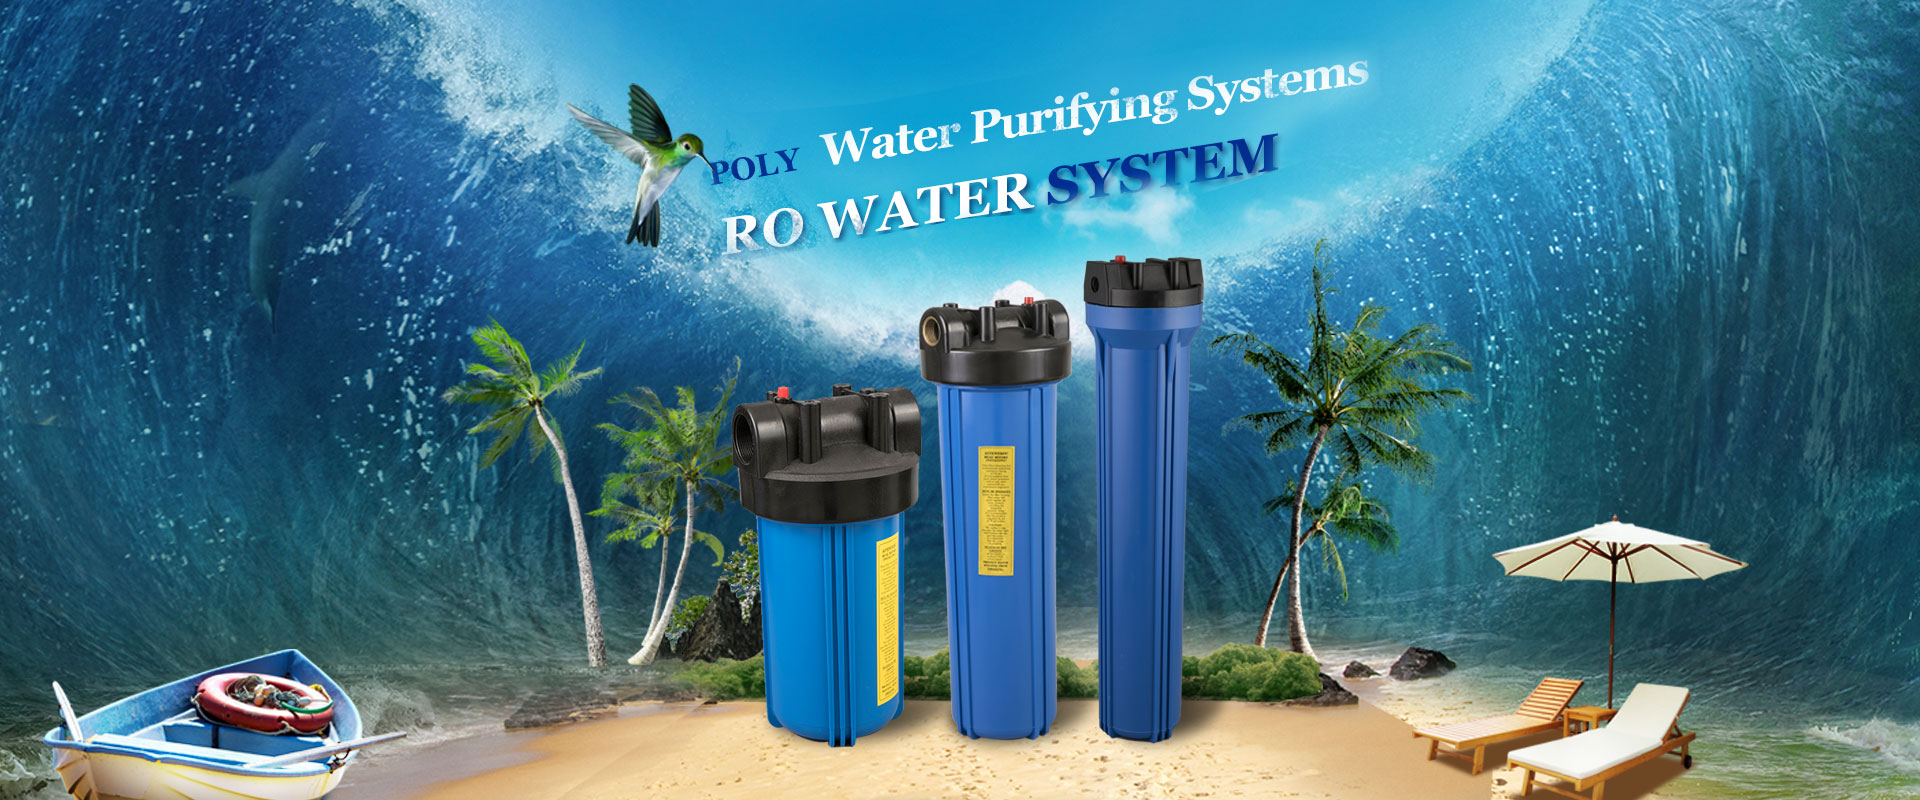 Introduction of the function of the water purifier